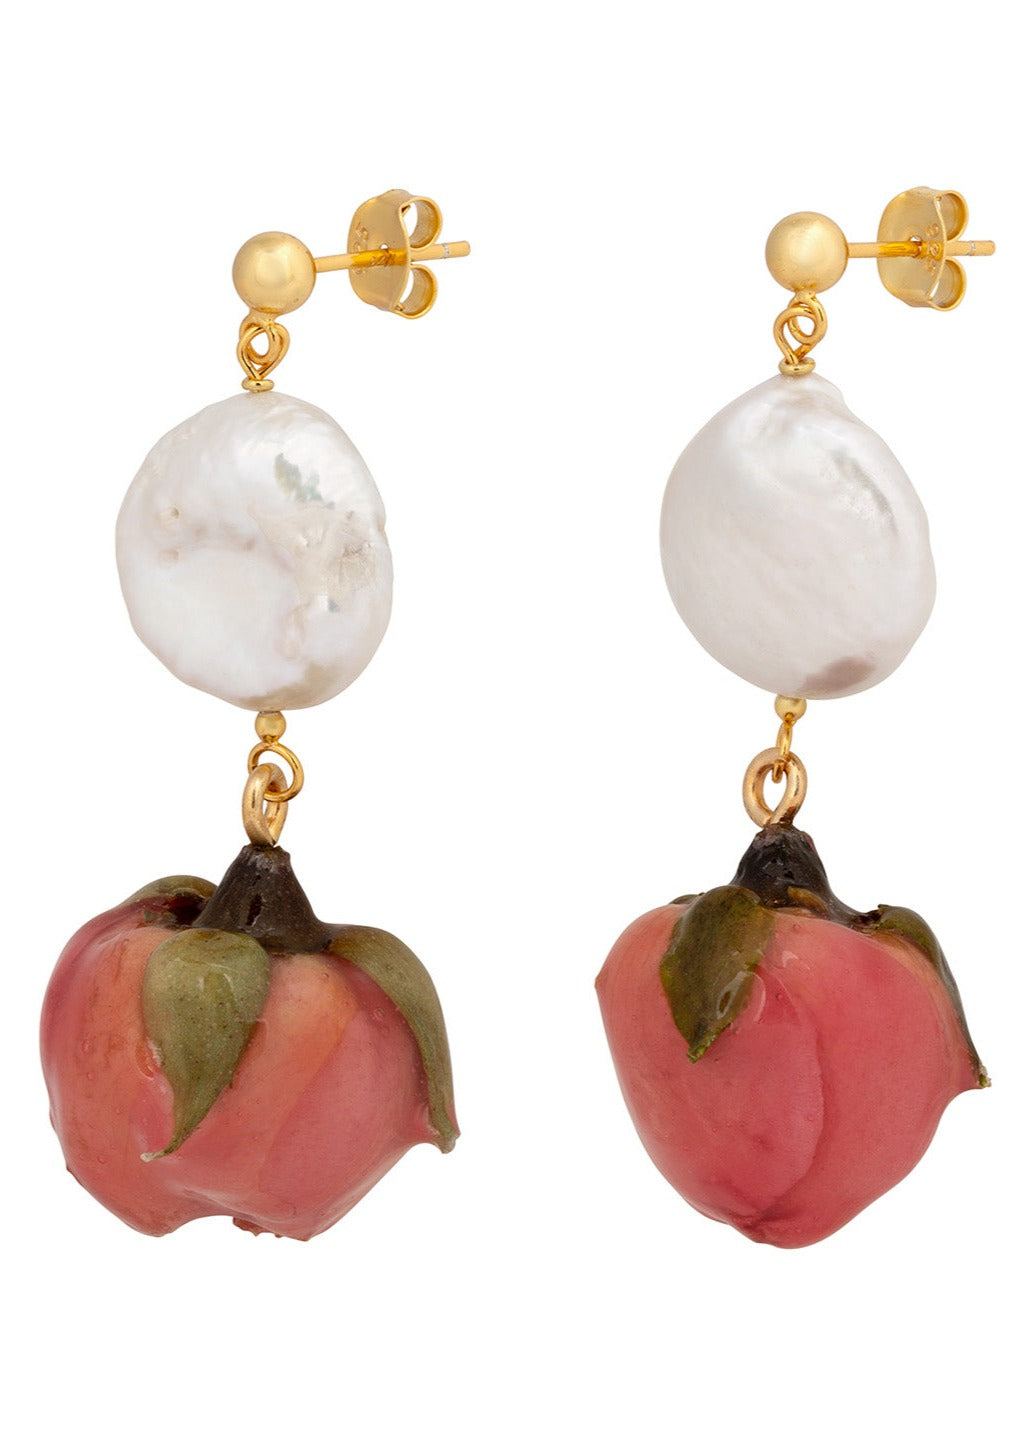 18k Gold plated .925 sterling silver studs with freshwater pearl and sakura rosebud charm